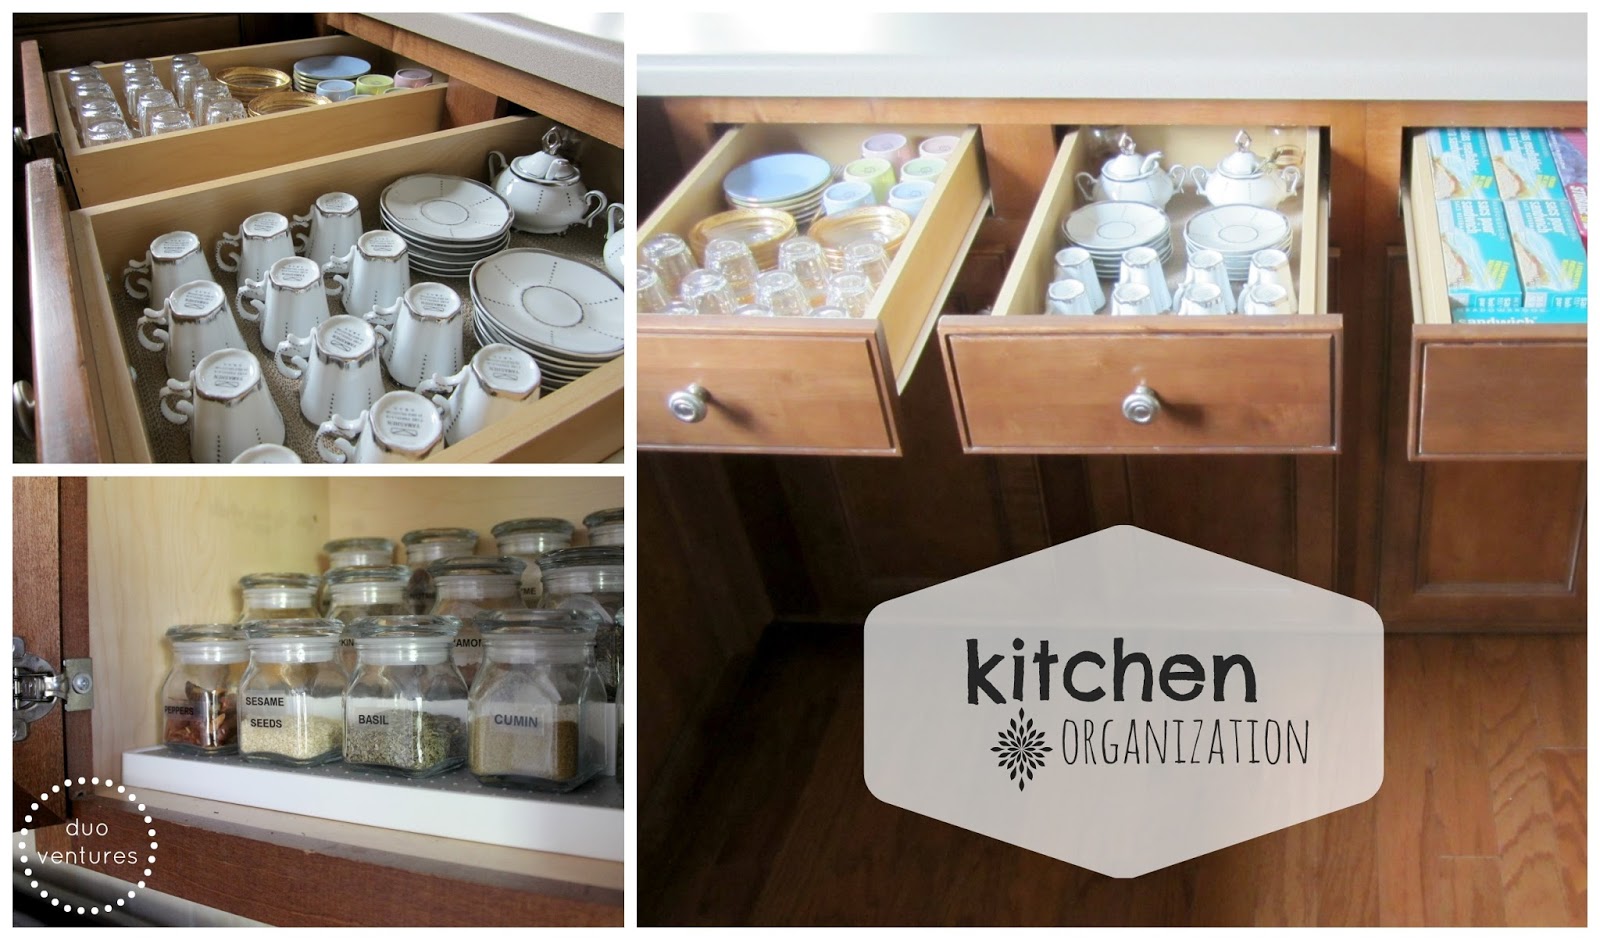 Duo Ventures: Organizing: The Kitchen